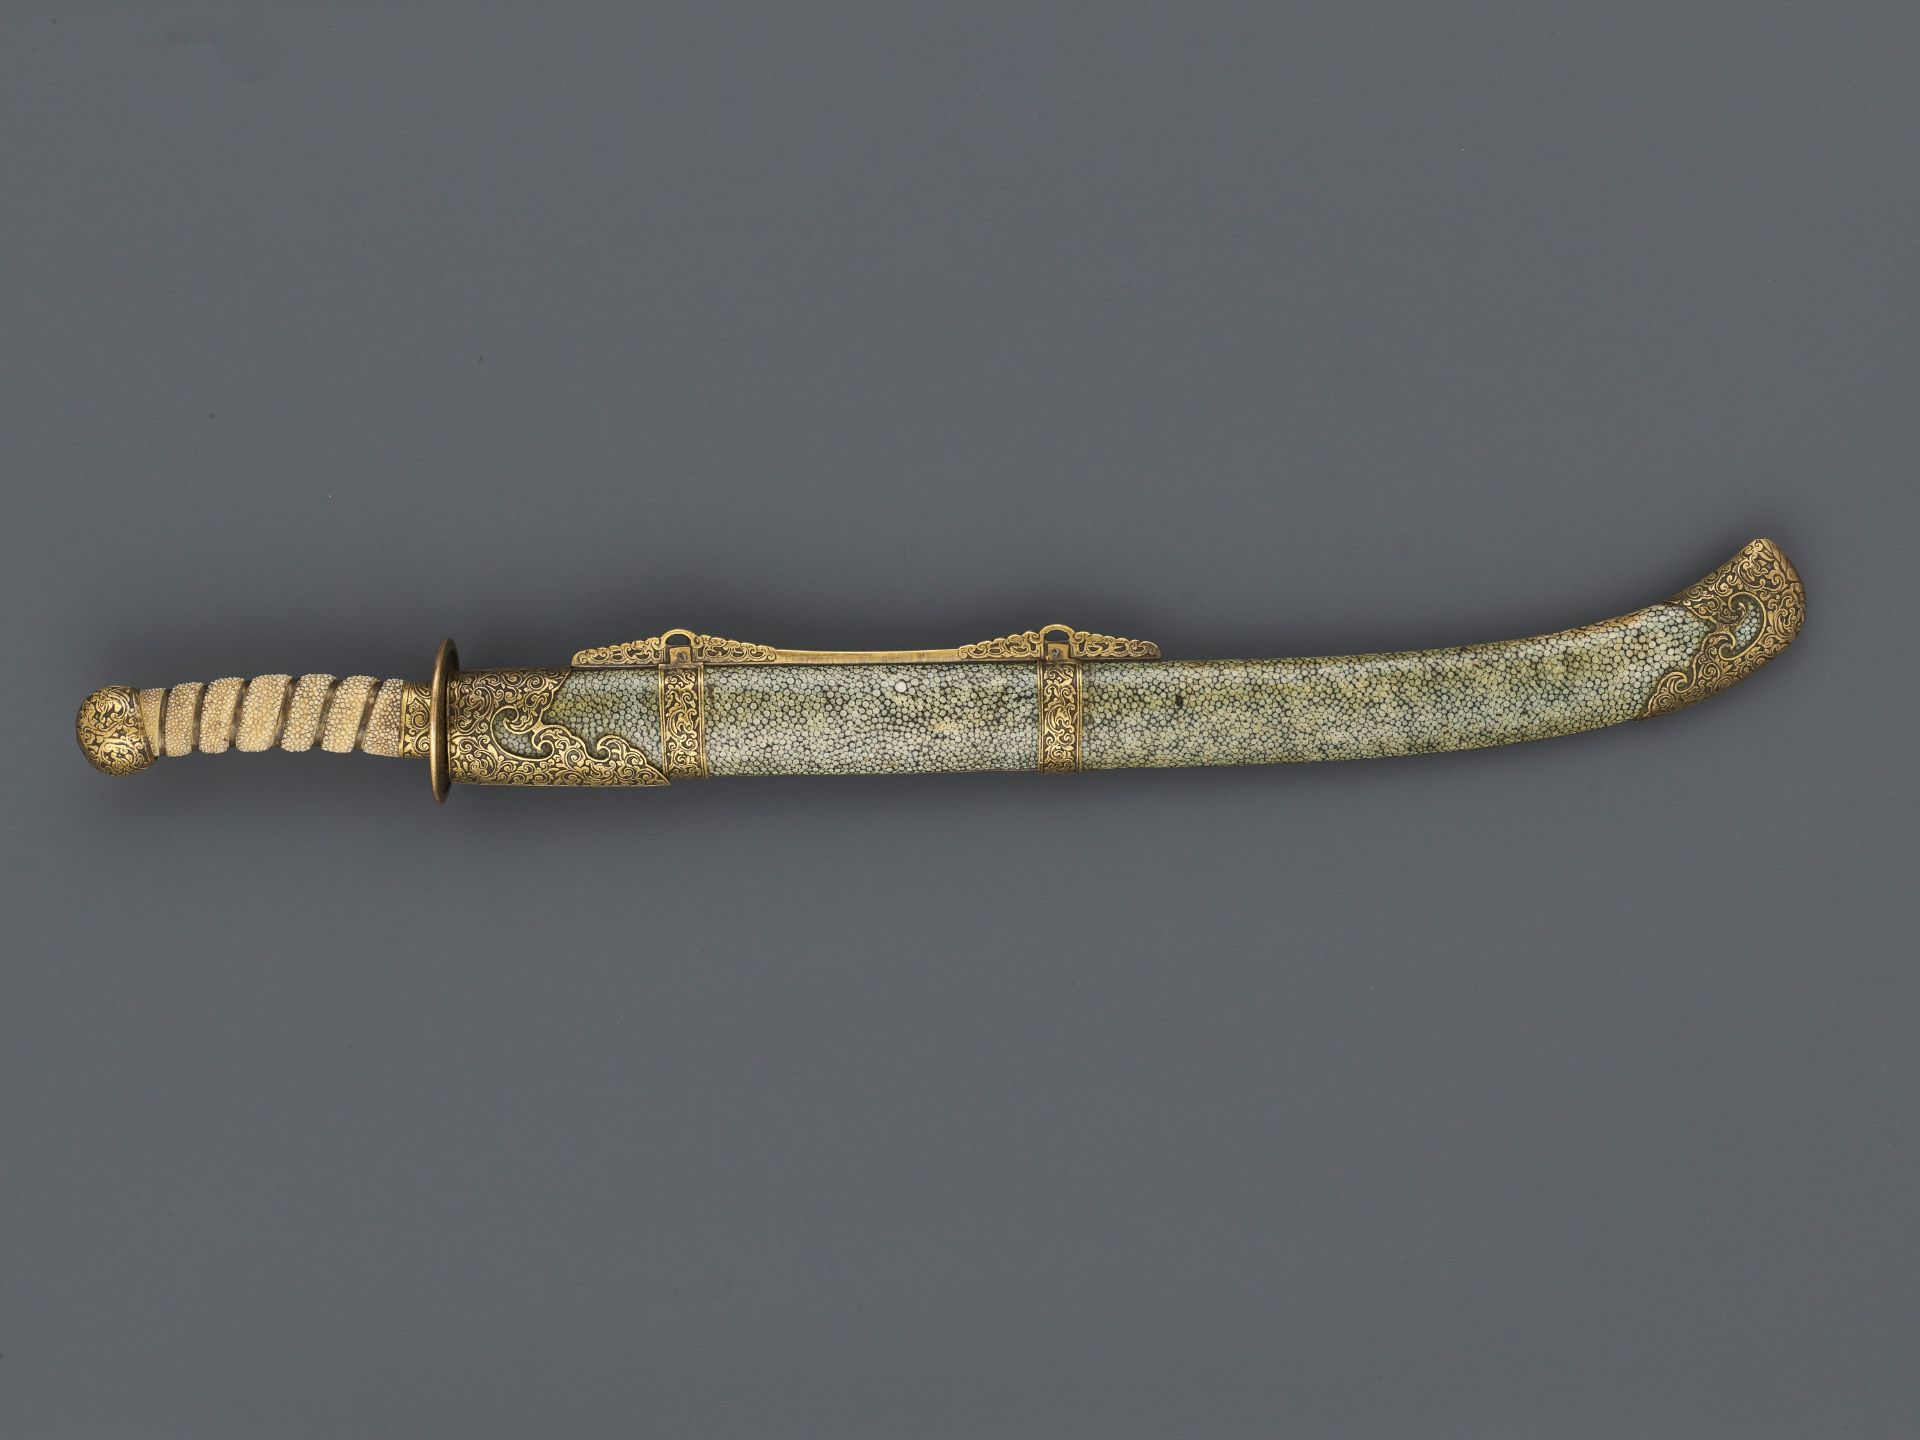 A CEREMONIAL SWORD AND SCABBARD, QING DYNASTY - Image 6 of 7